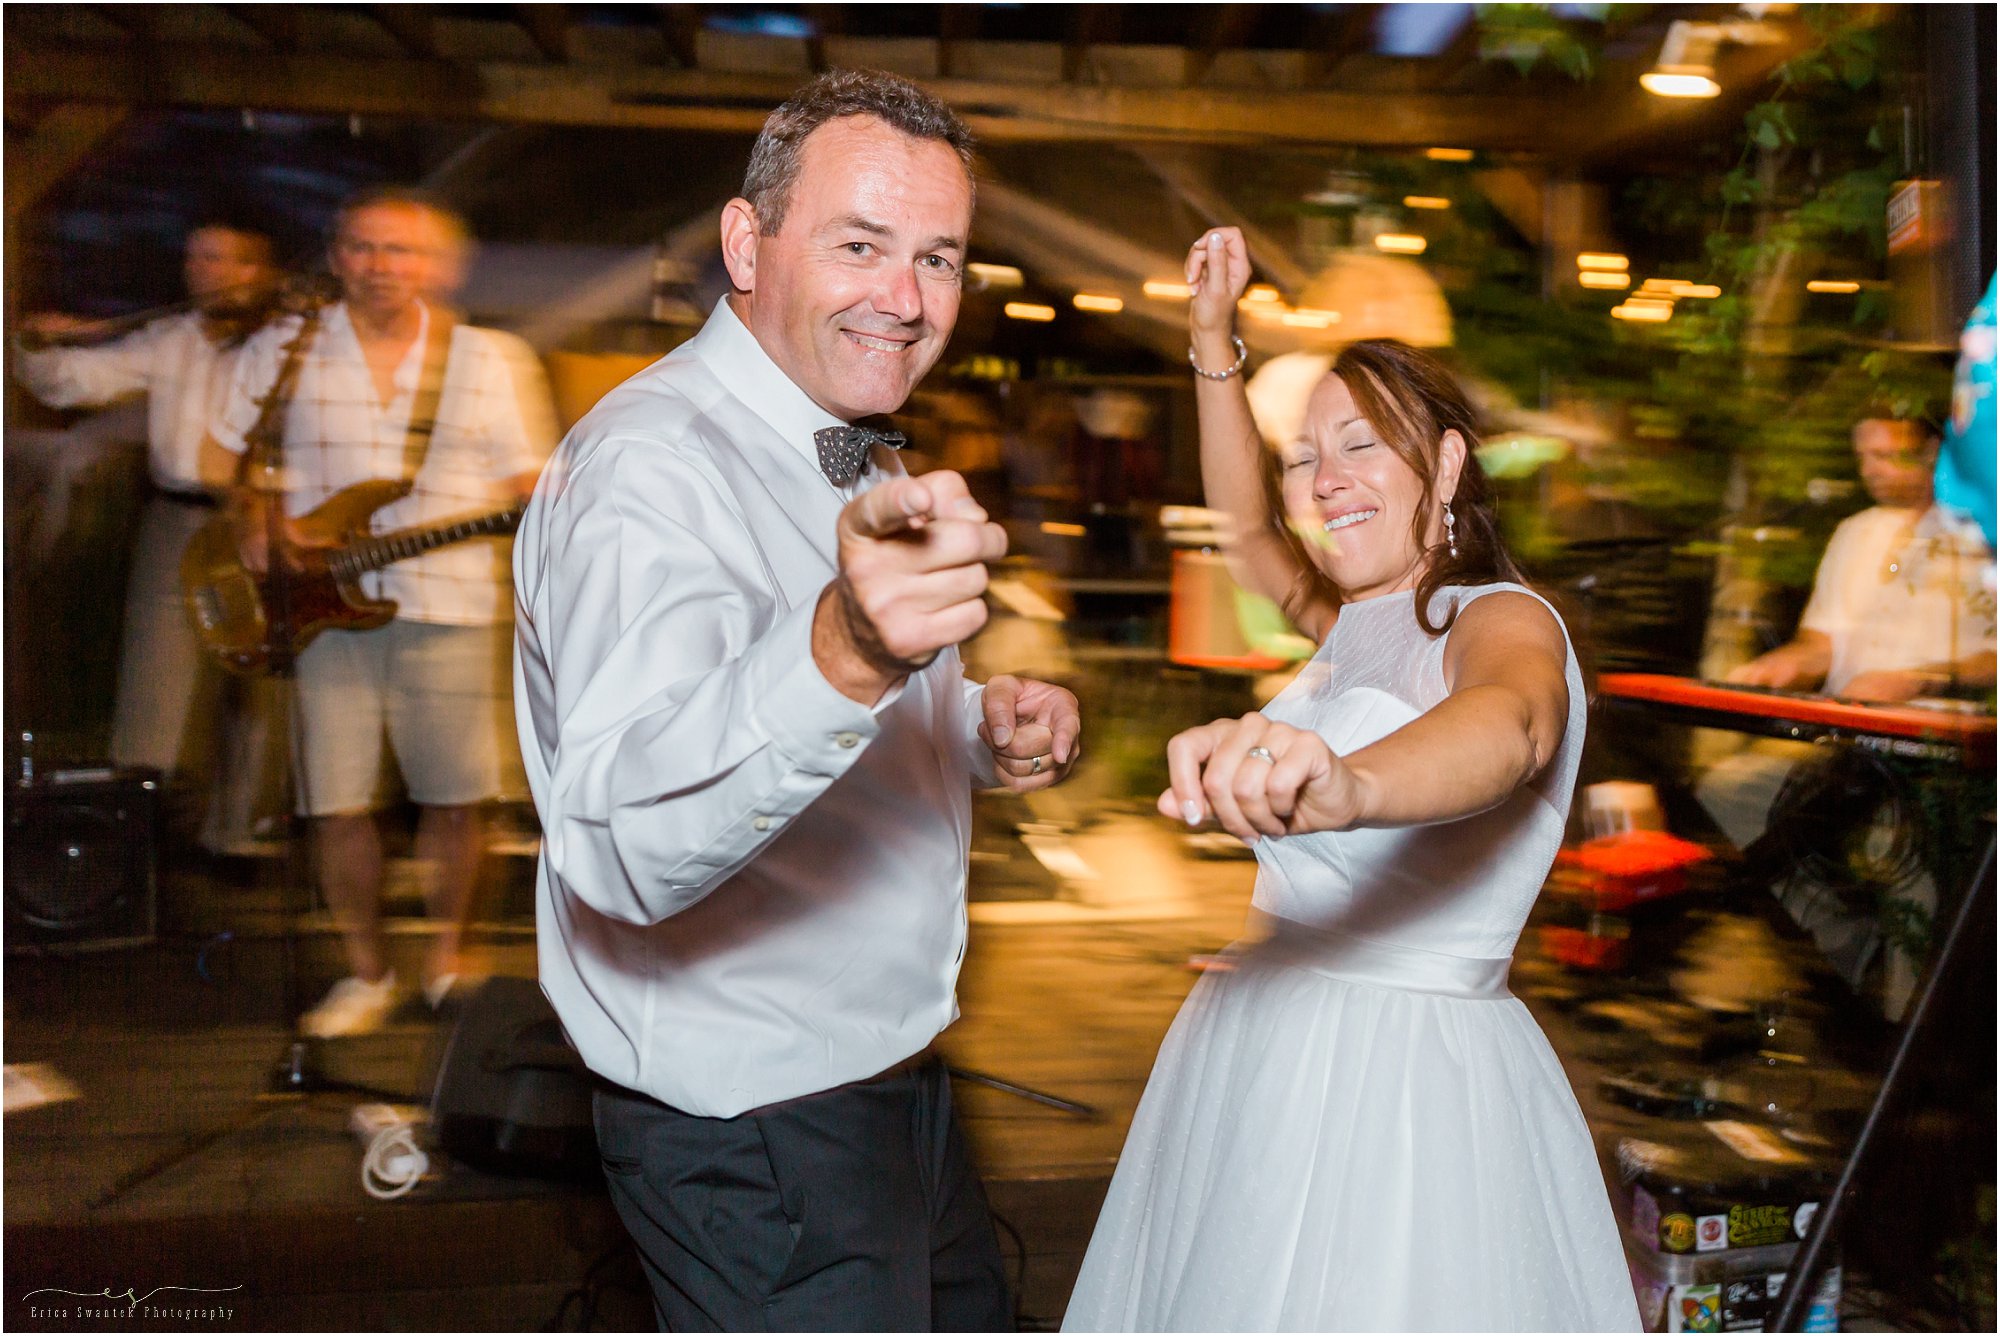 Dancing to the live band at this outdoor wedding reception near Bend, Oregon by Bend wedding photographer Erica Swantek Photography. 